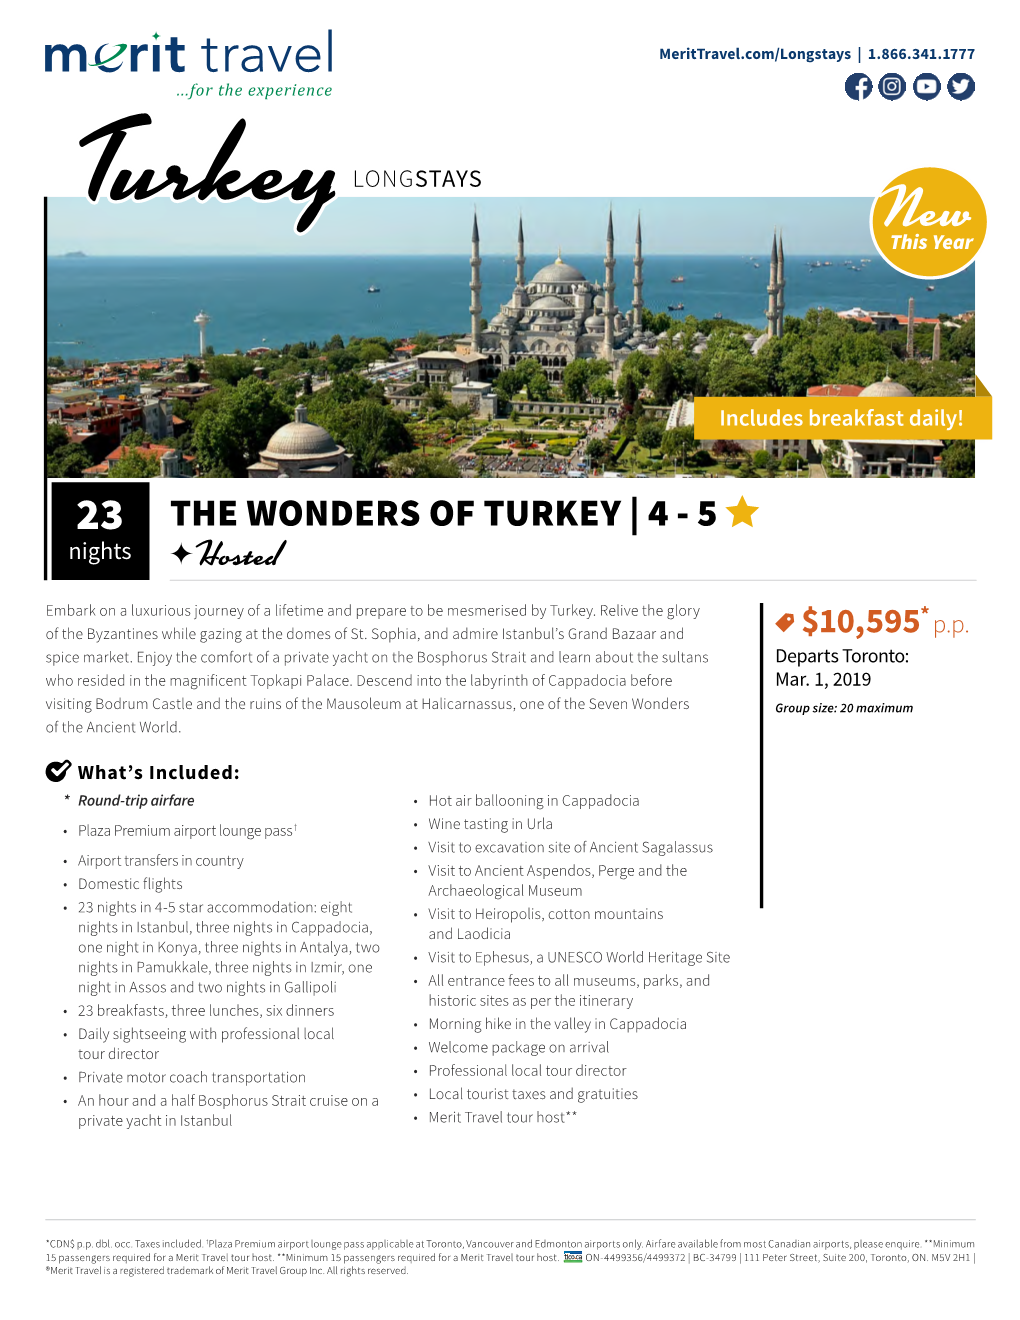 THE WONDERS of TURKEY | 4 - 5 Nights Hosted